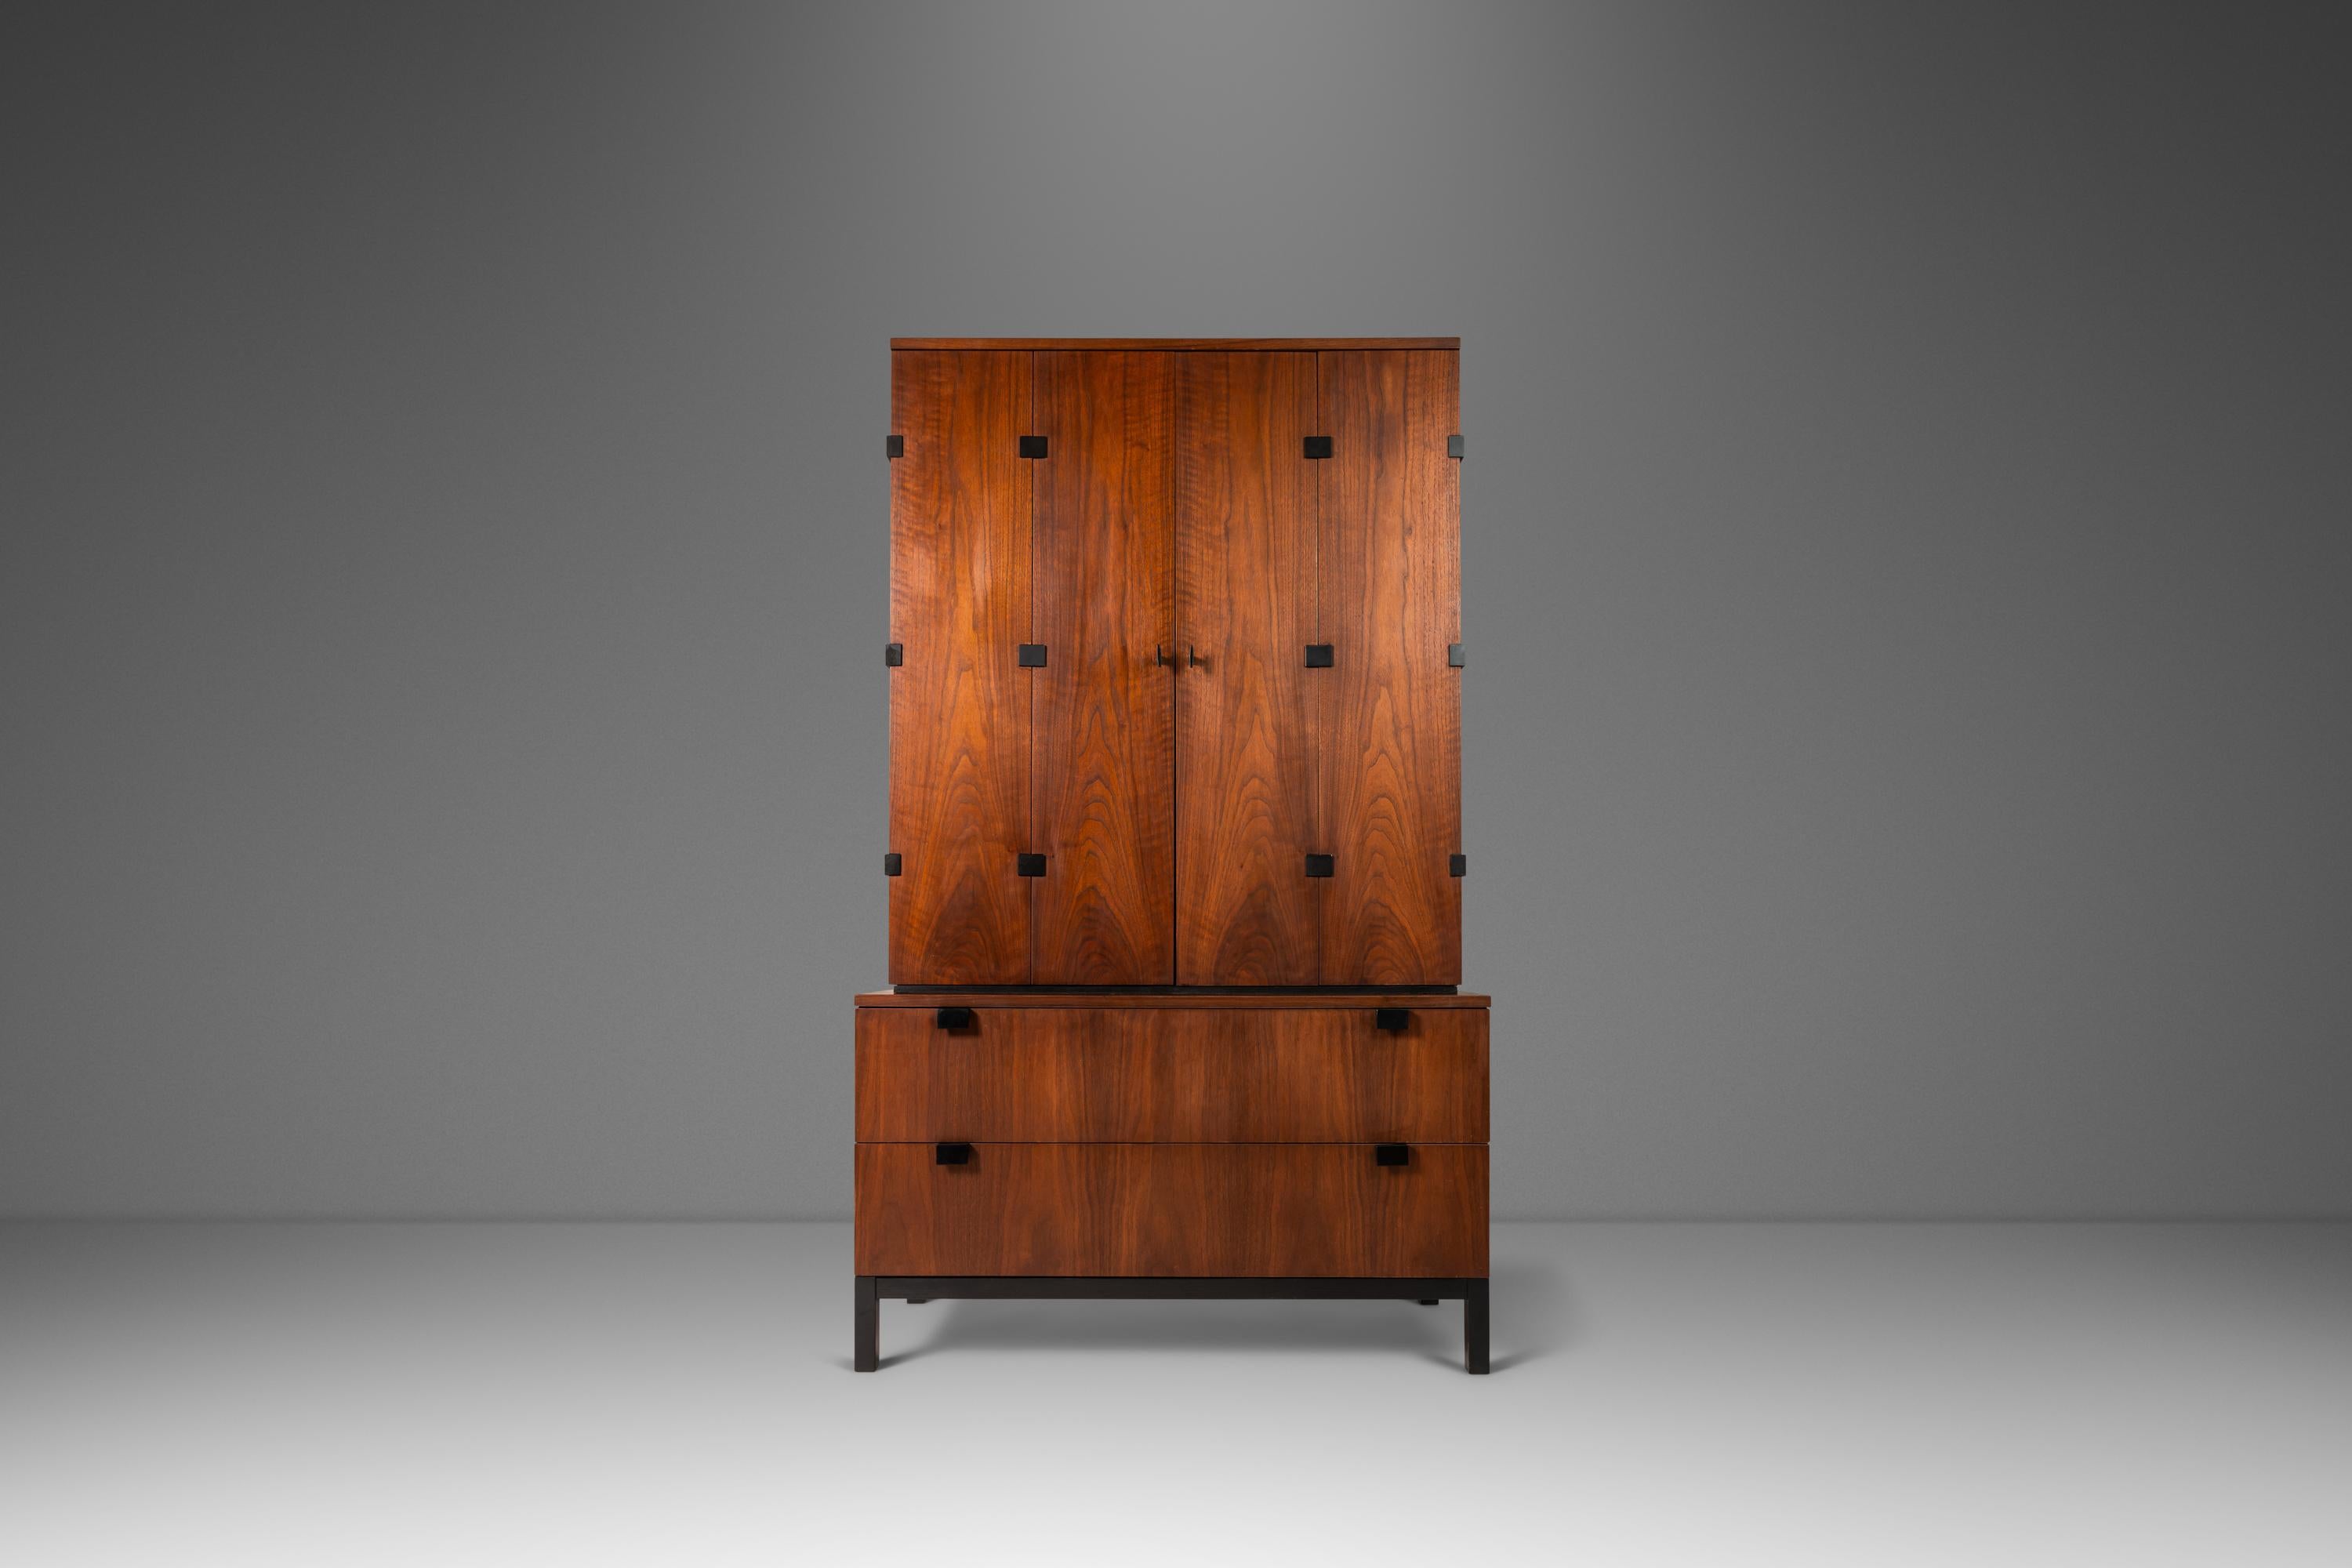 As rare as it is architecturally alluring this extraordinary tall-boy dresser, designed by the prolific Milo Baughman for the Directional Furniture Co., is a true Mid-Century Modern gem. Constructed from a mix of solid and veneered black walnut with